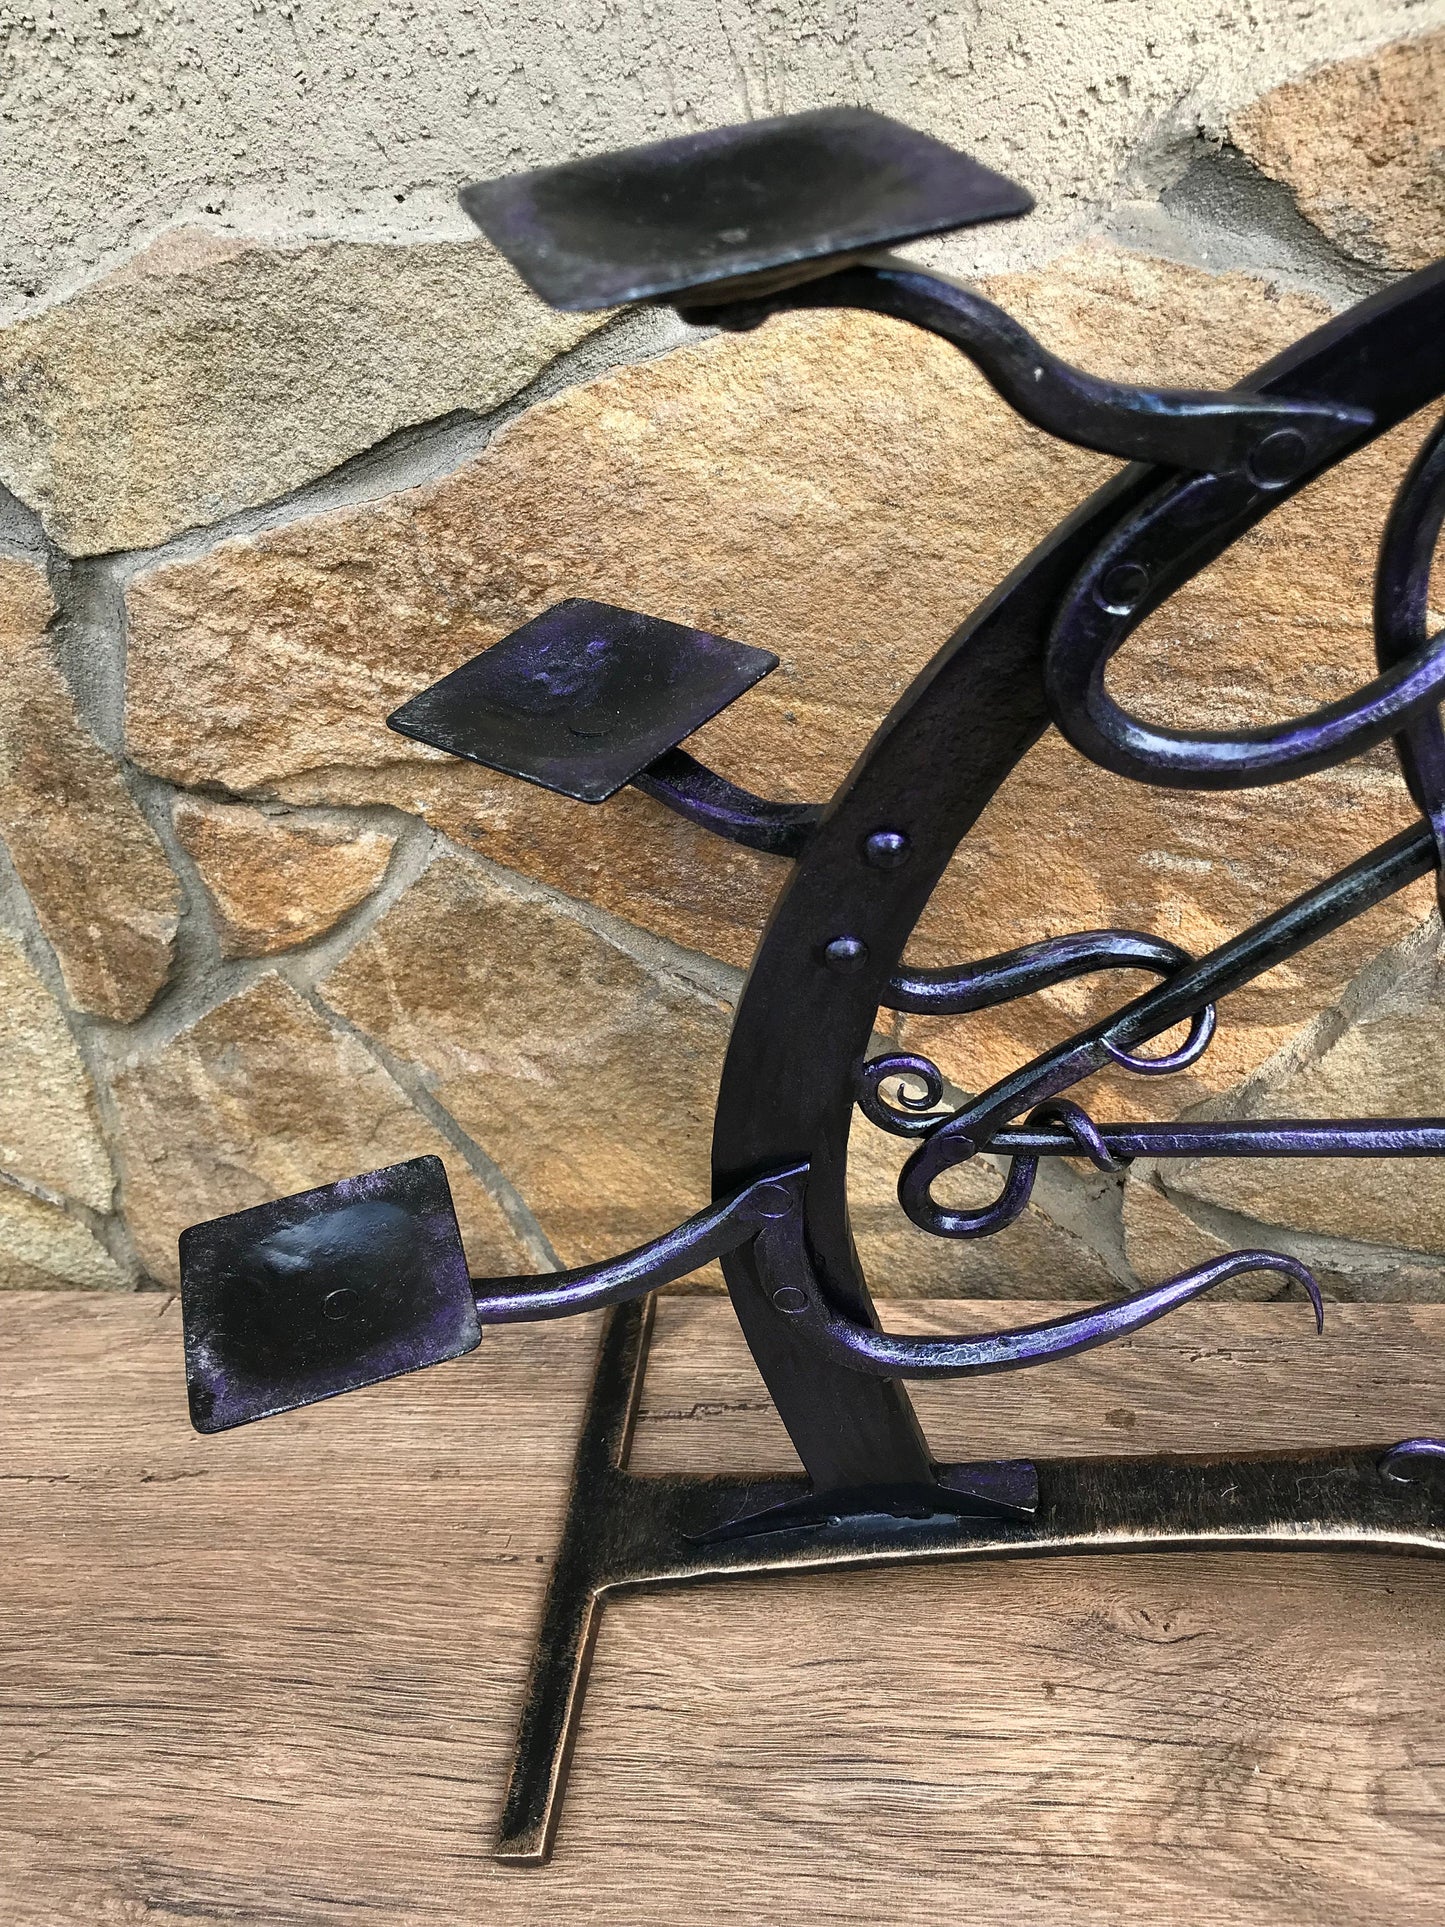 Iron anniversary gift for her,iron candle holder, iron anniversary gift for him, iron gift for her, hand forged candle holder, candle holder